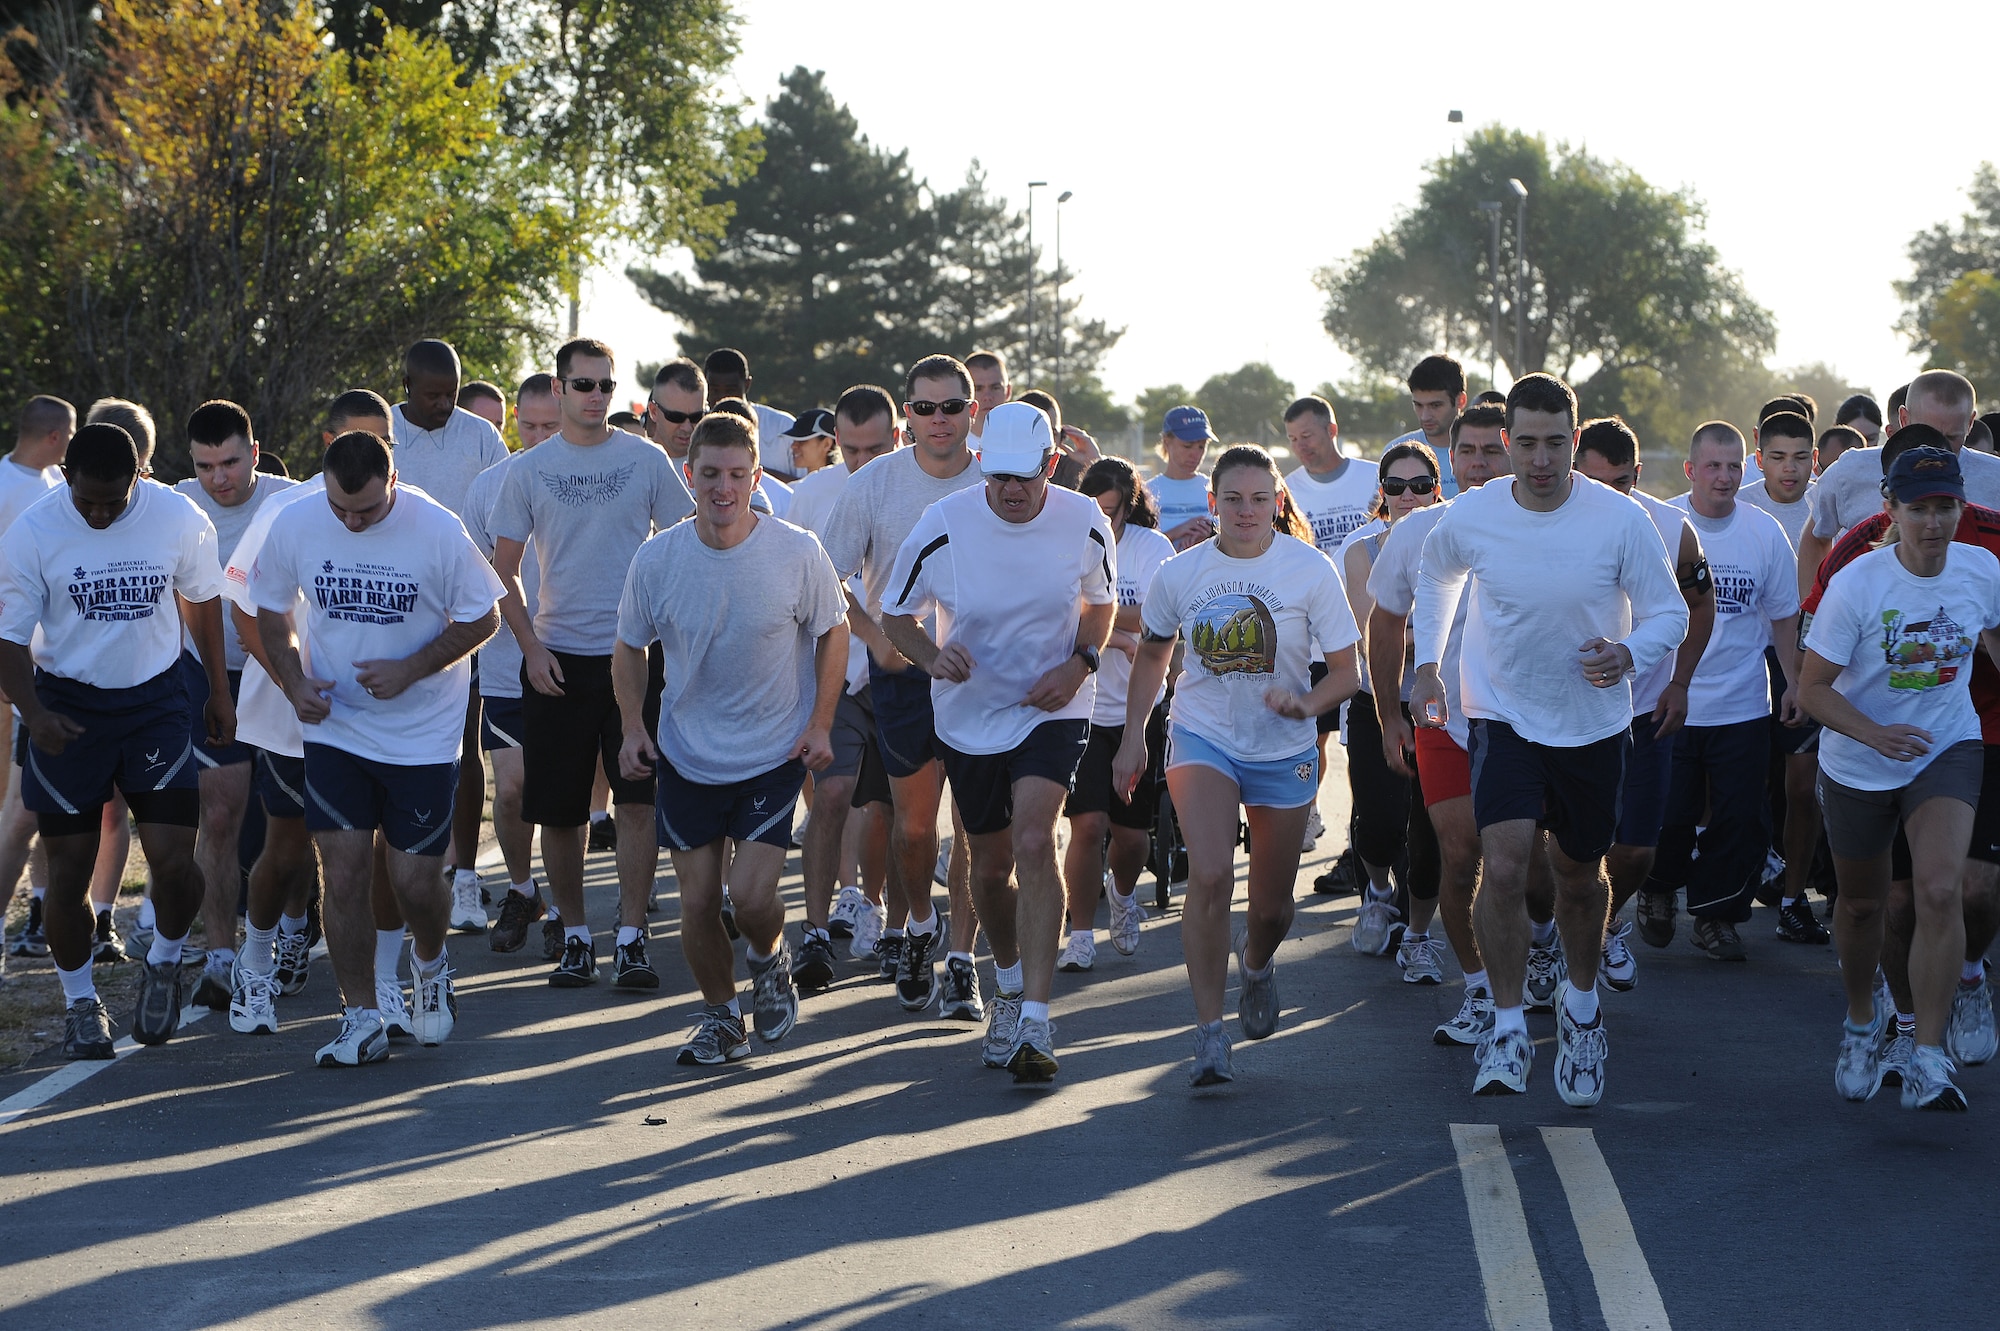 Team Buckley Members take off to start the Operation Warm Heart 5K run here Sept. 26. More than 70 people took part in the run to help raise donations for military families during the holidays. The Buckley First Sergeants Association, in conjunction with the 460th Space Wing Chapel, runs Operation Warm Heart. Donations are still being accepted. To make a donation, talk to a first sergeant any time of year. (Air Force photo by Airman 1st Class Christopher Bush.)